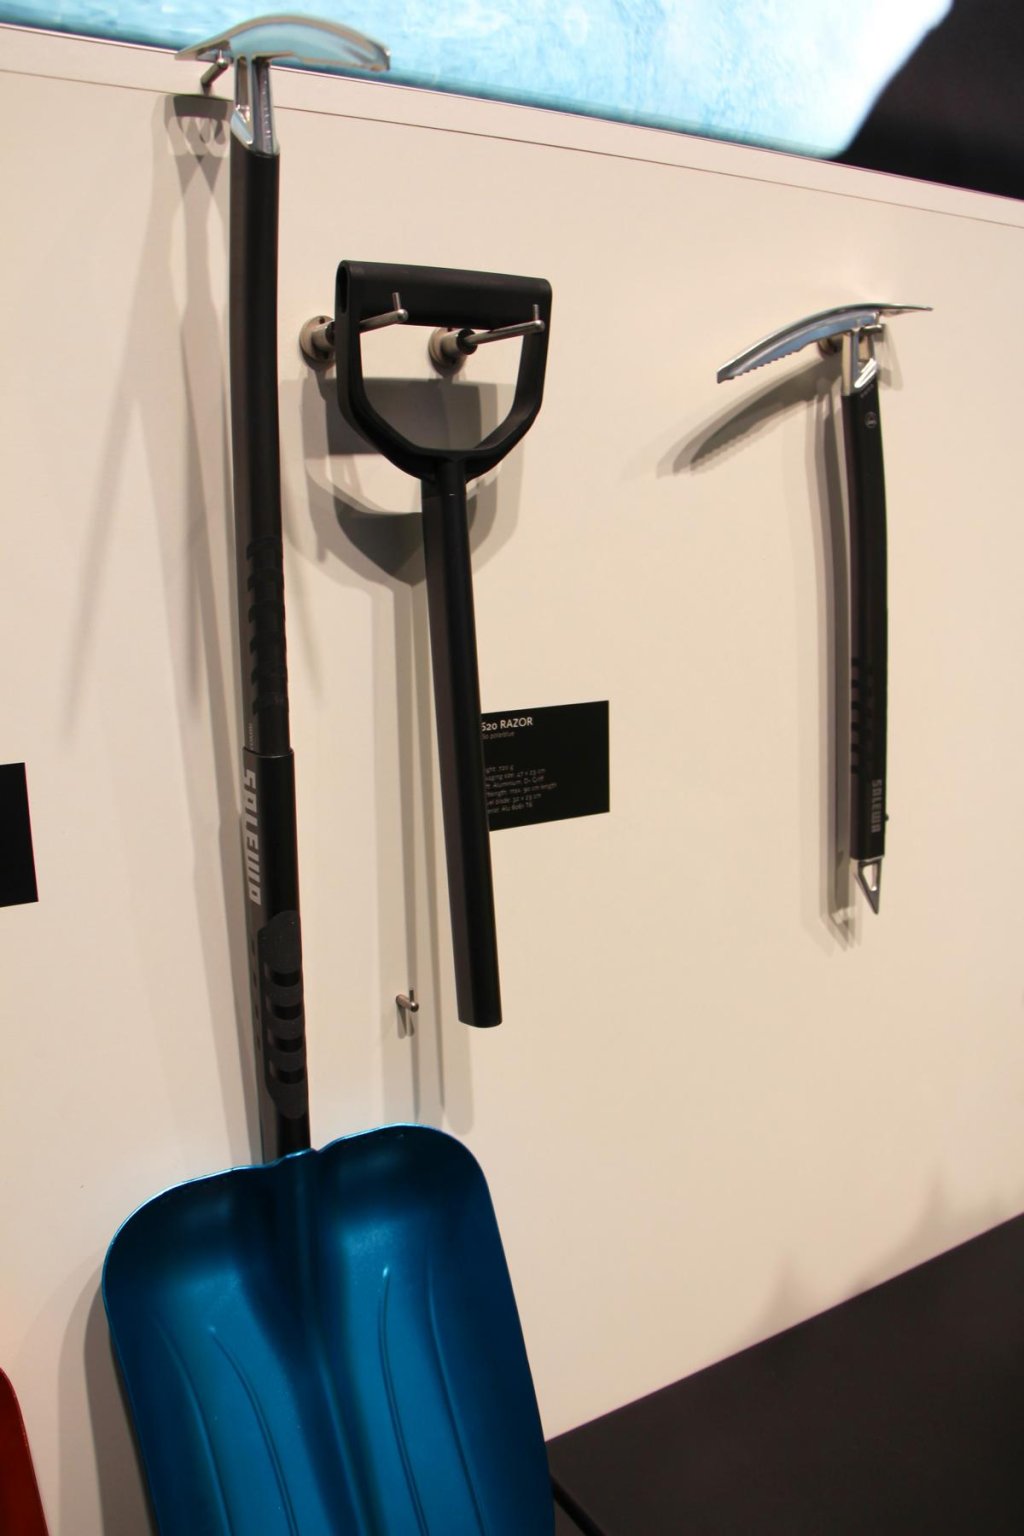 Salewa ice axe can be combined with shovel